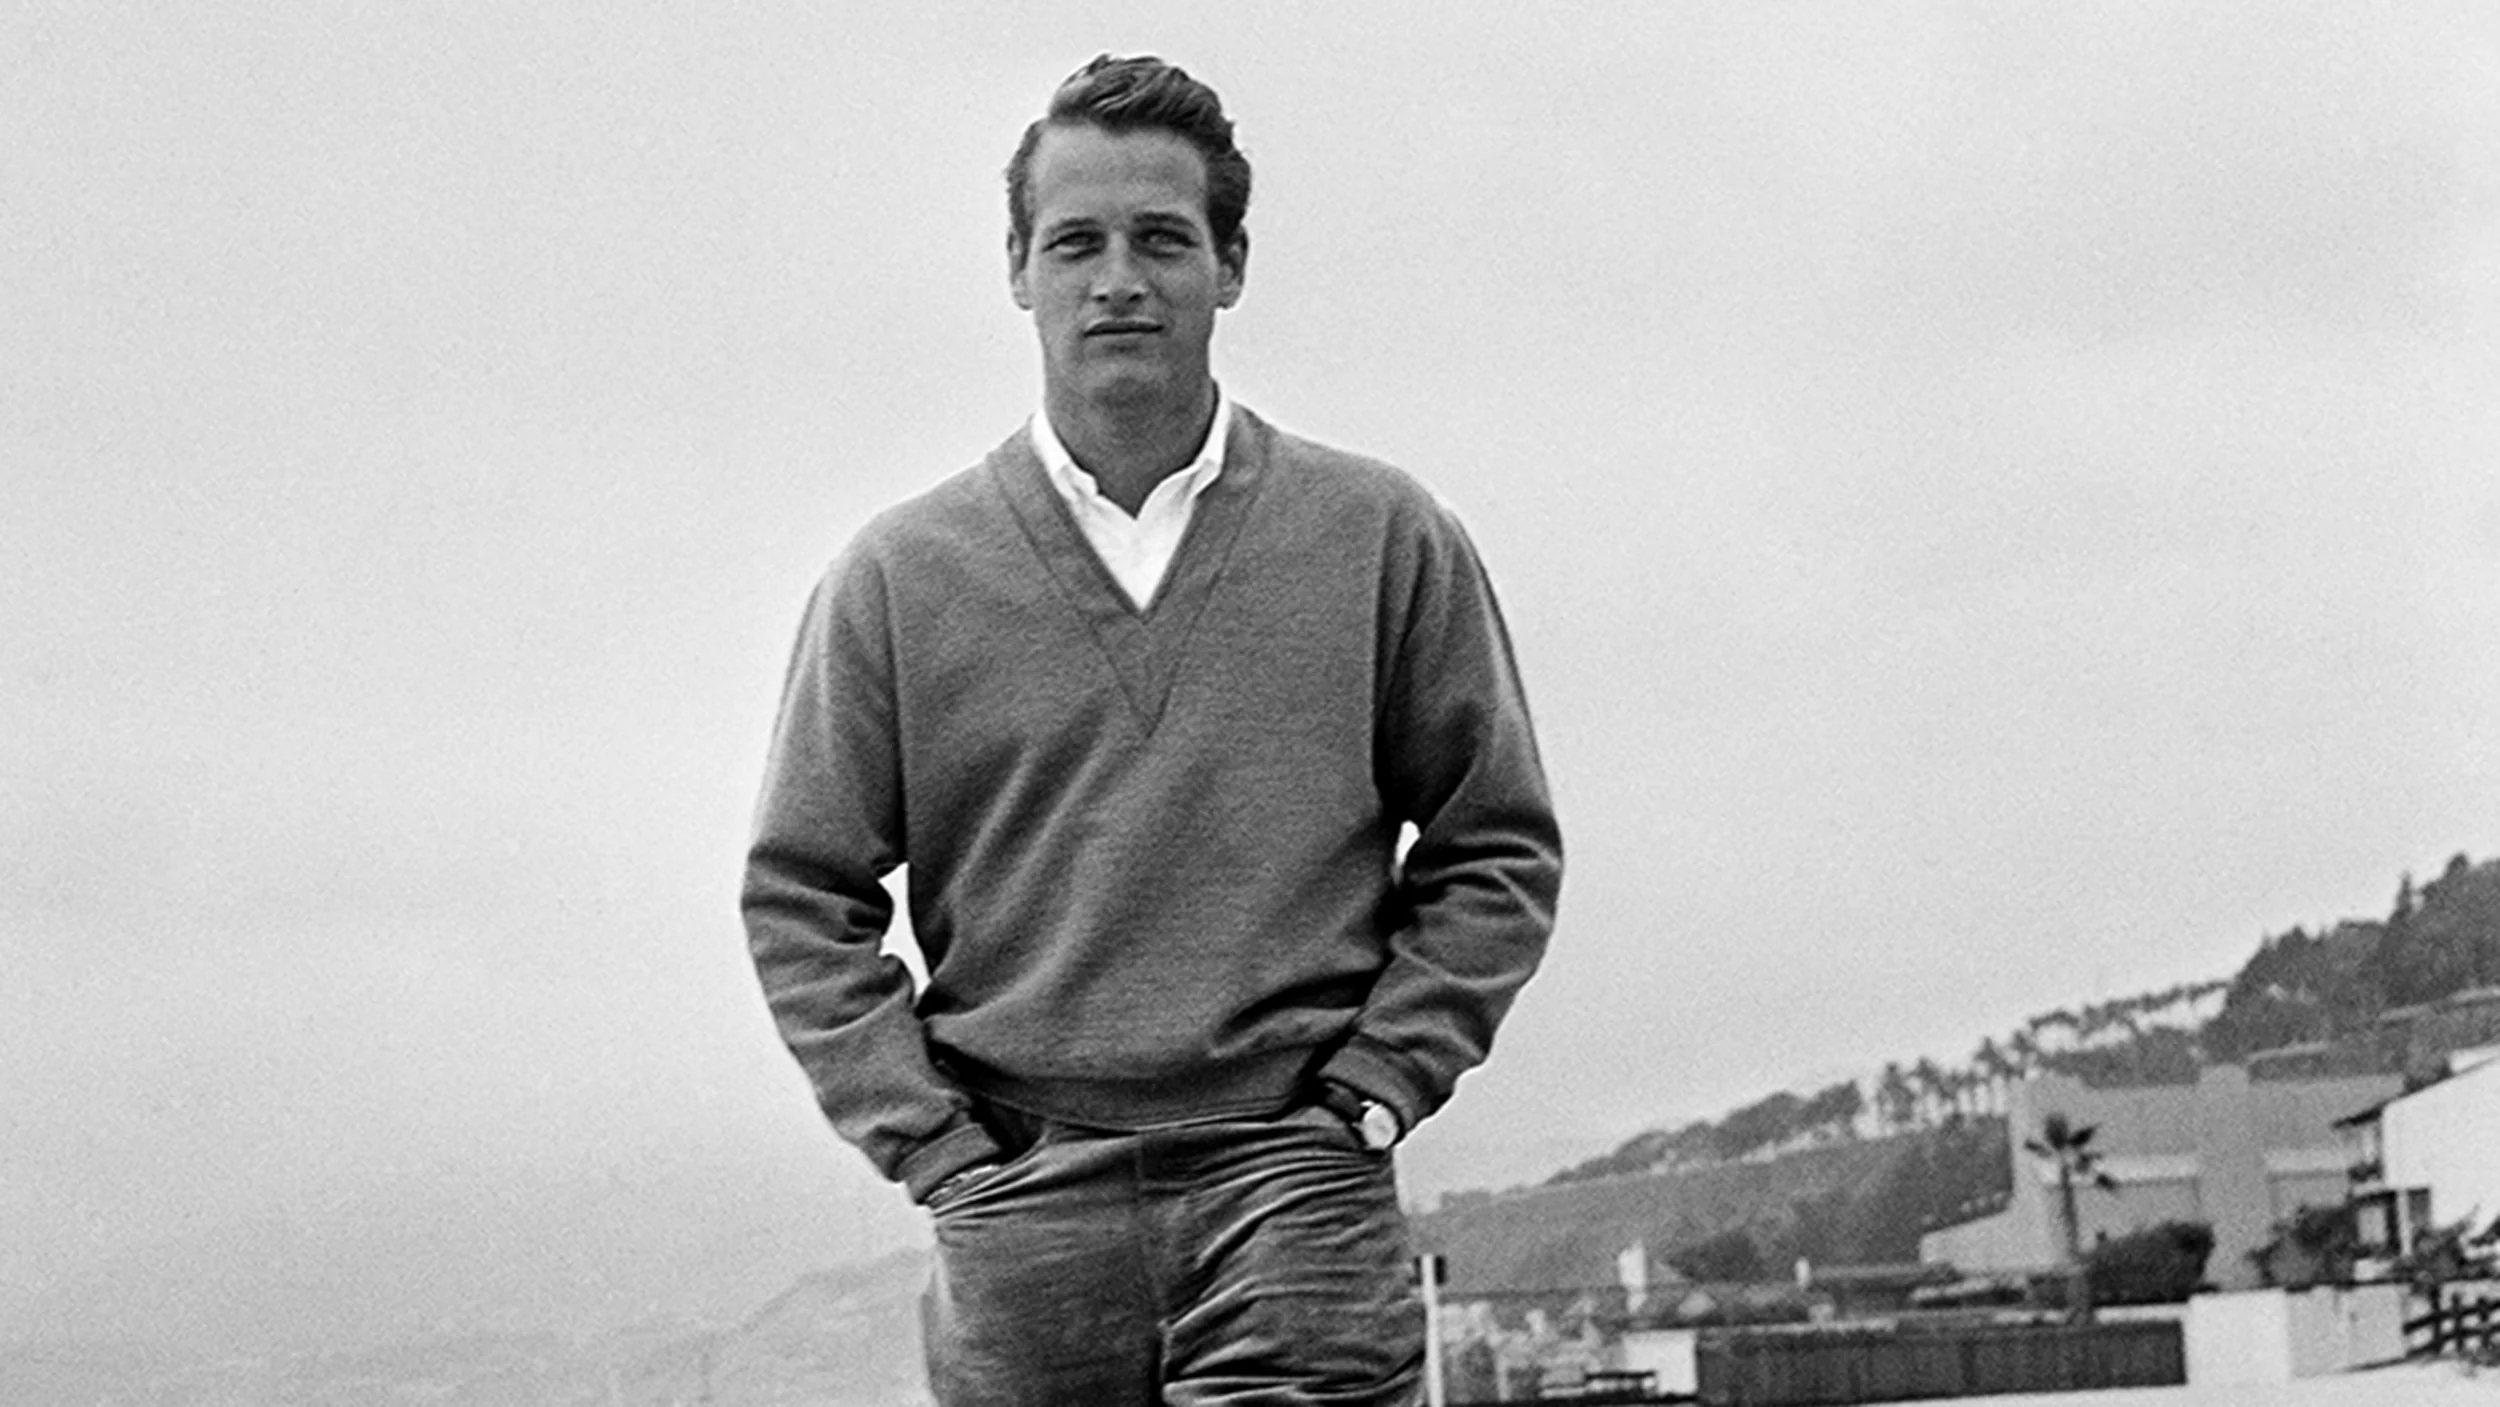 Paul Newman's Vintage Rolex Beats Avengers' Paychecks: How a $20 Million Watch Outshines Star Salaries